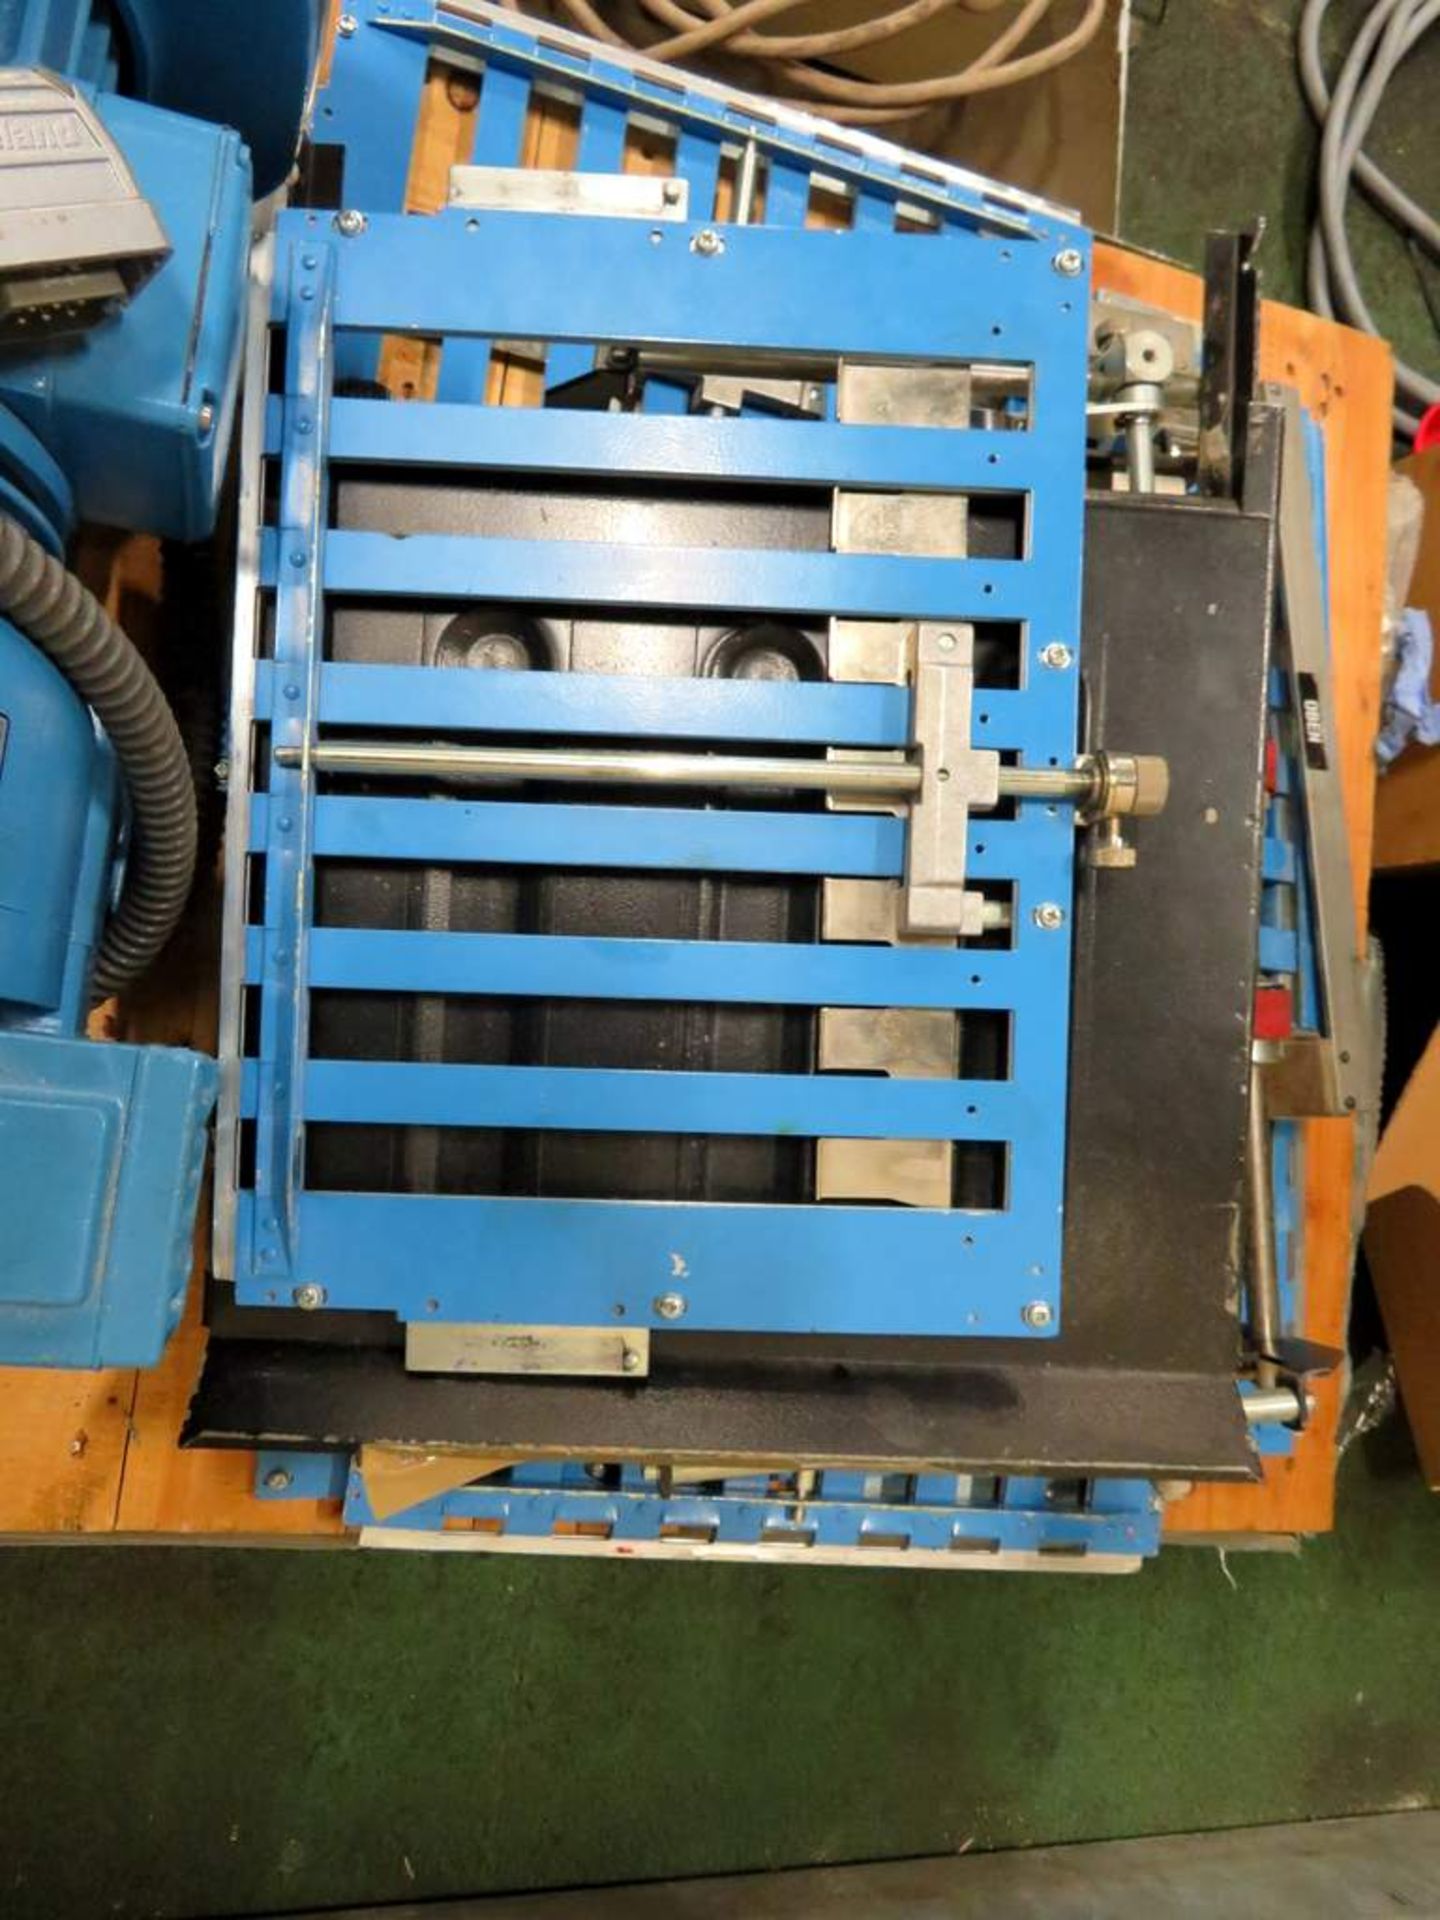 GUK Model FA 35/4R1 FN Folding Machine with High Capacity Feeder - Image 22 of 23